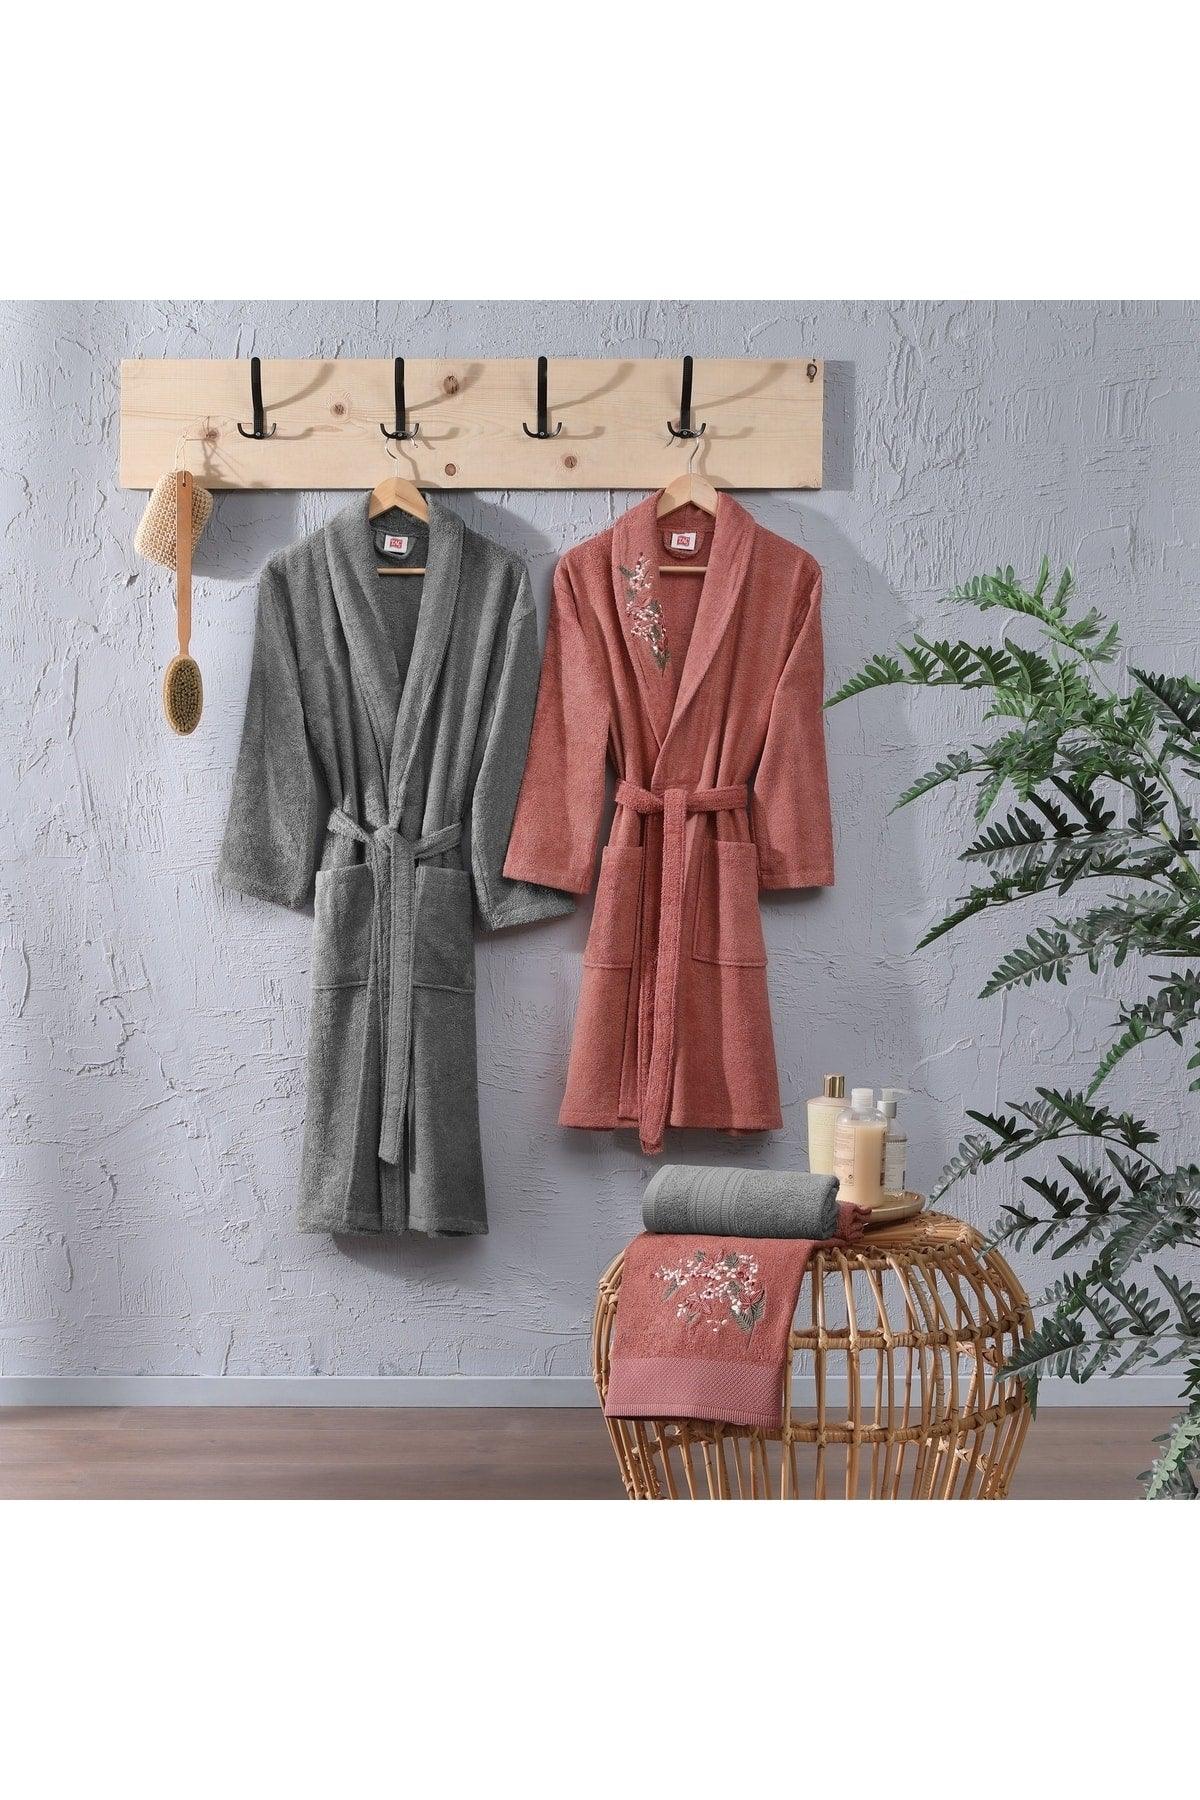 Mimosa Bamboo Family Set Rose Anthracite - Swordslife